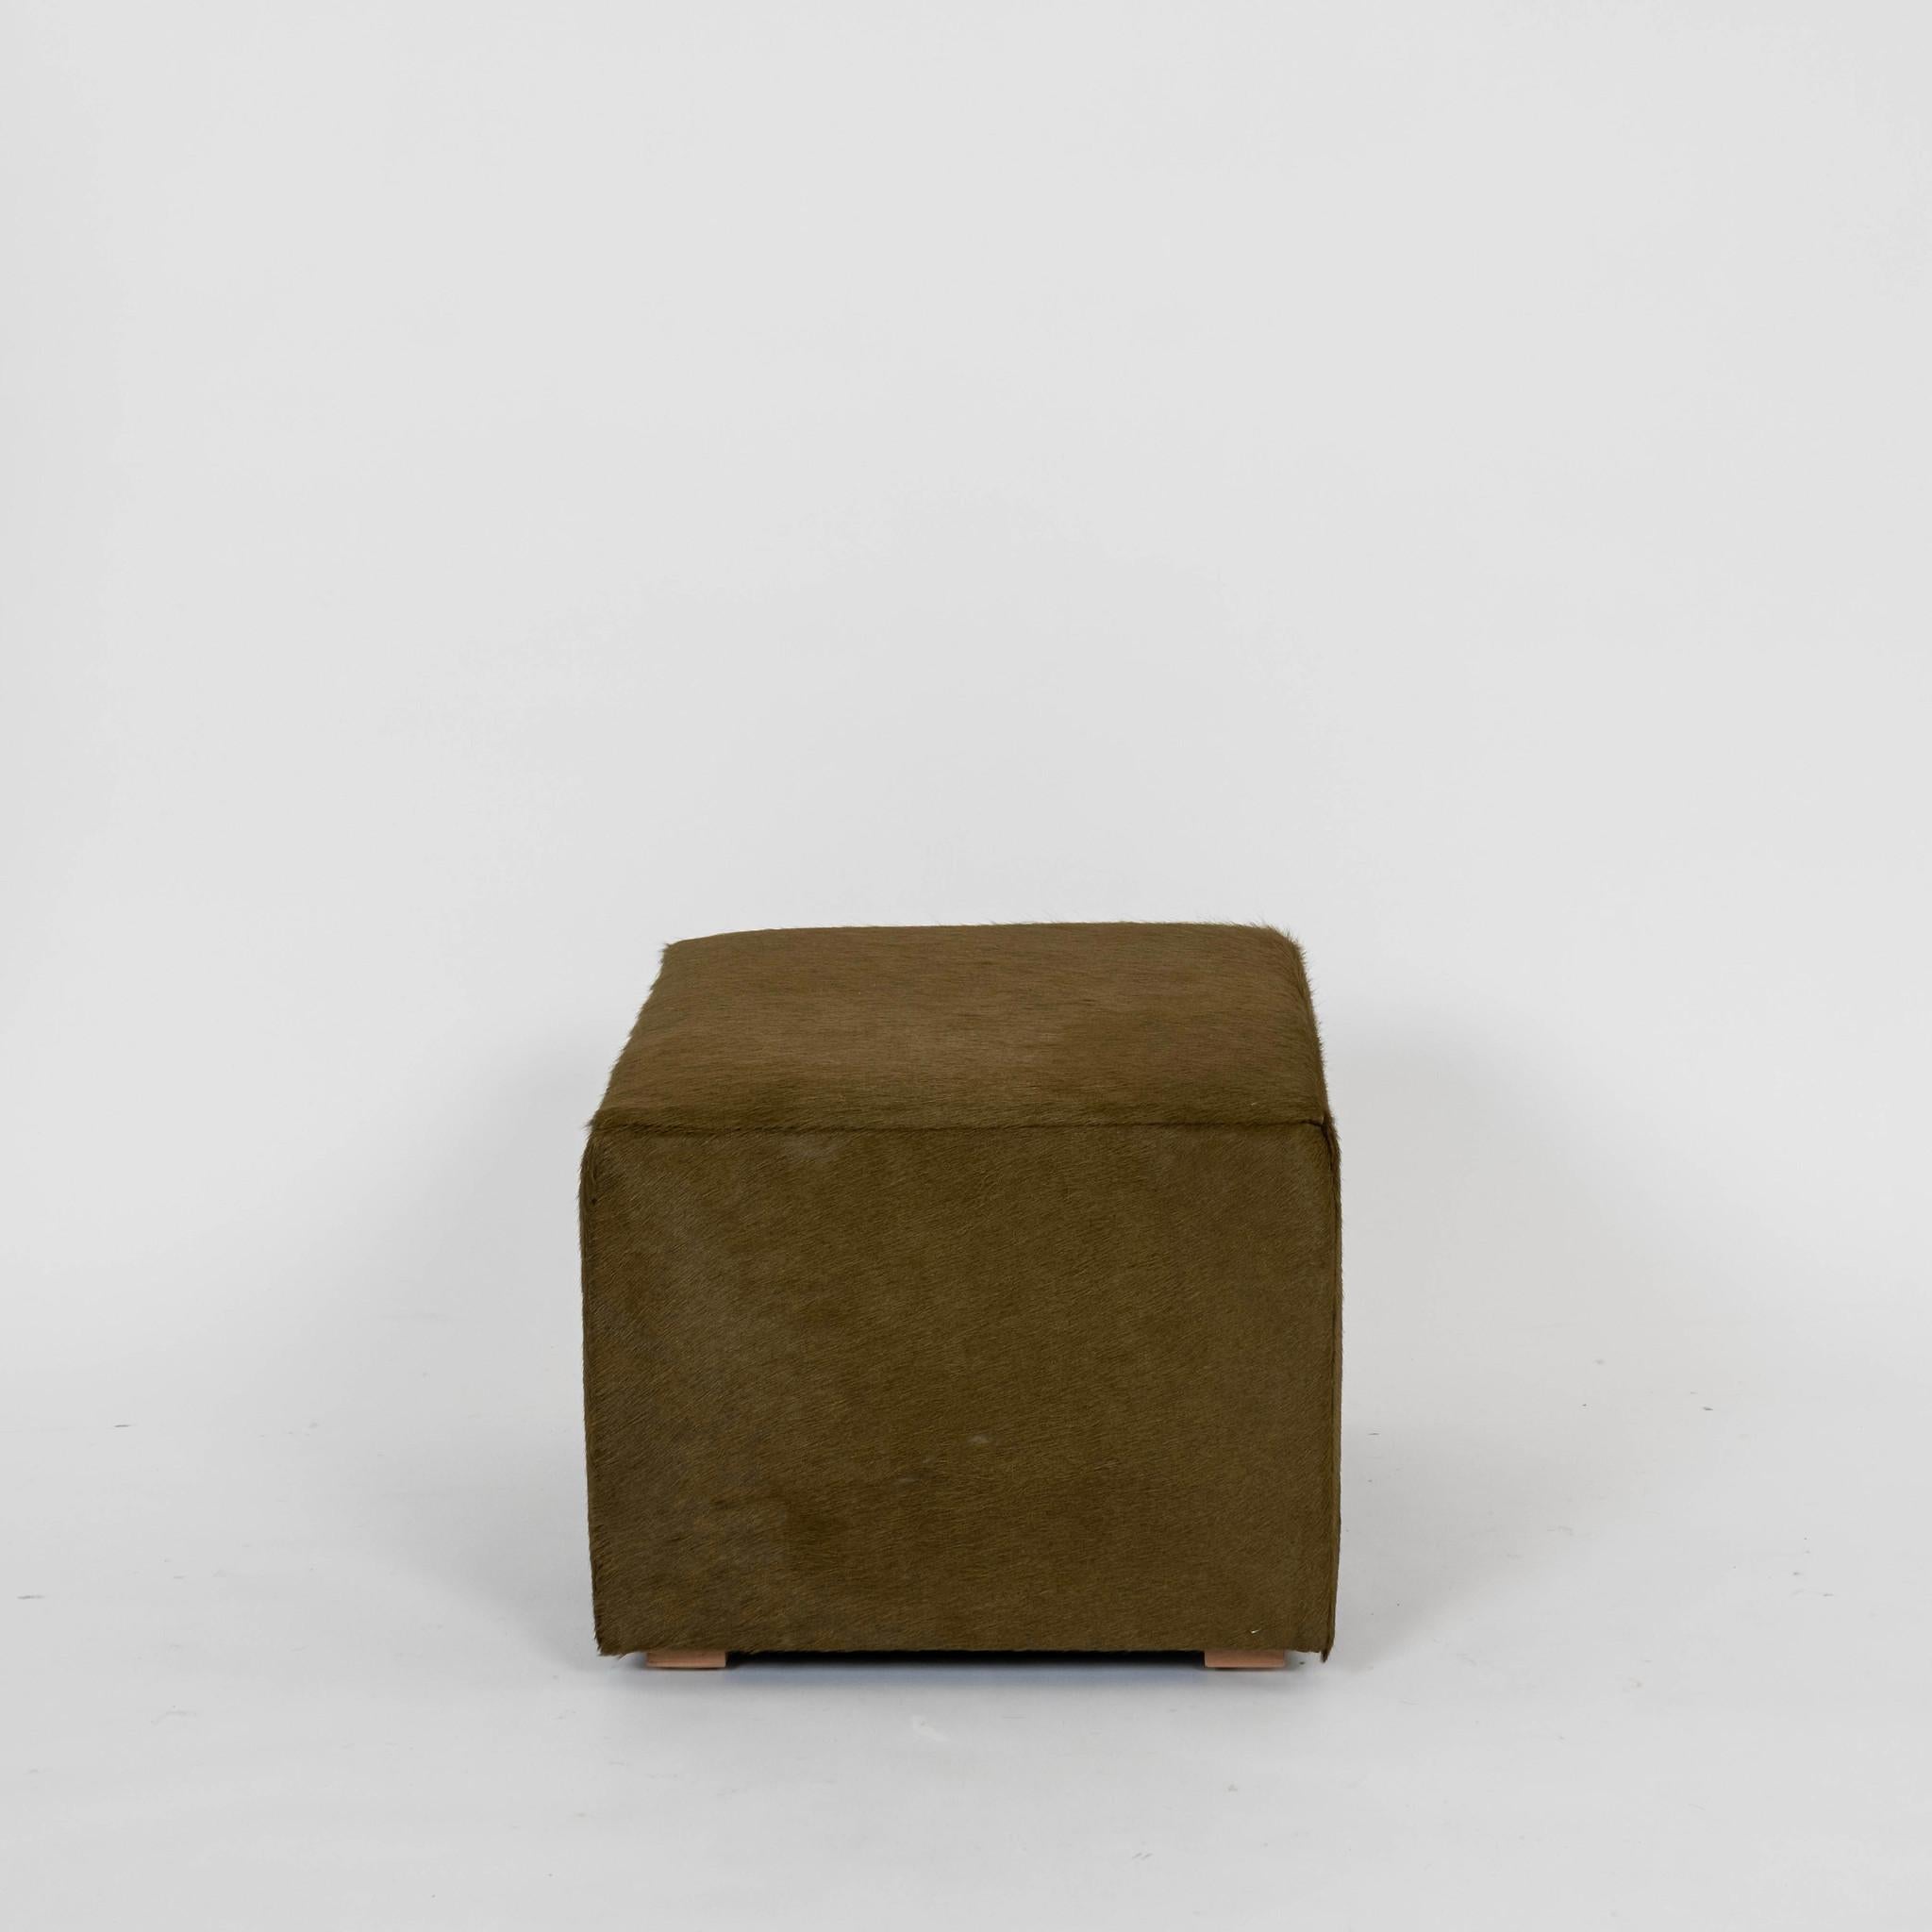 Cubist Verde Olive Green Hair Hide Ottoman With White Oak Feet In Excellent Condition For Sale In Houston, TX